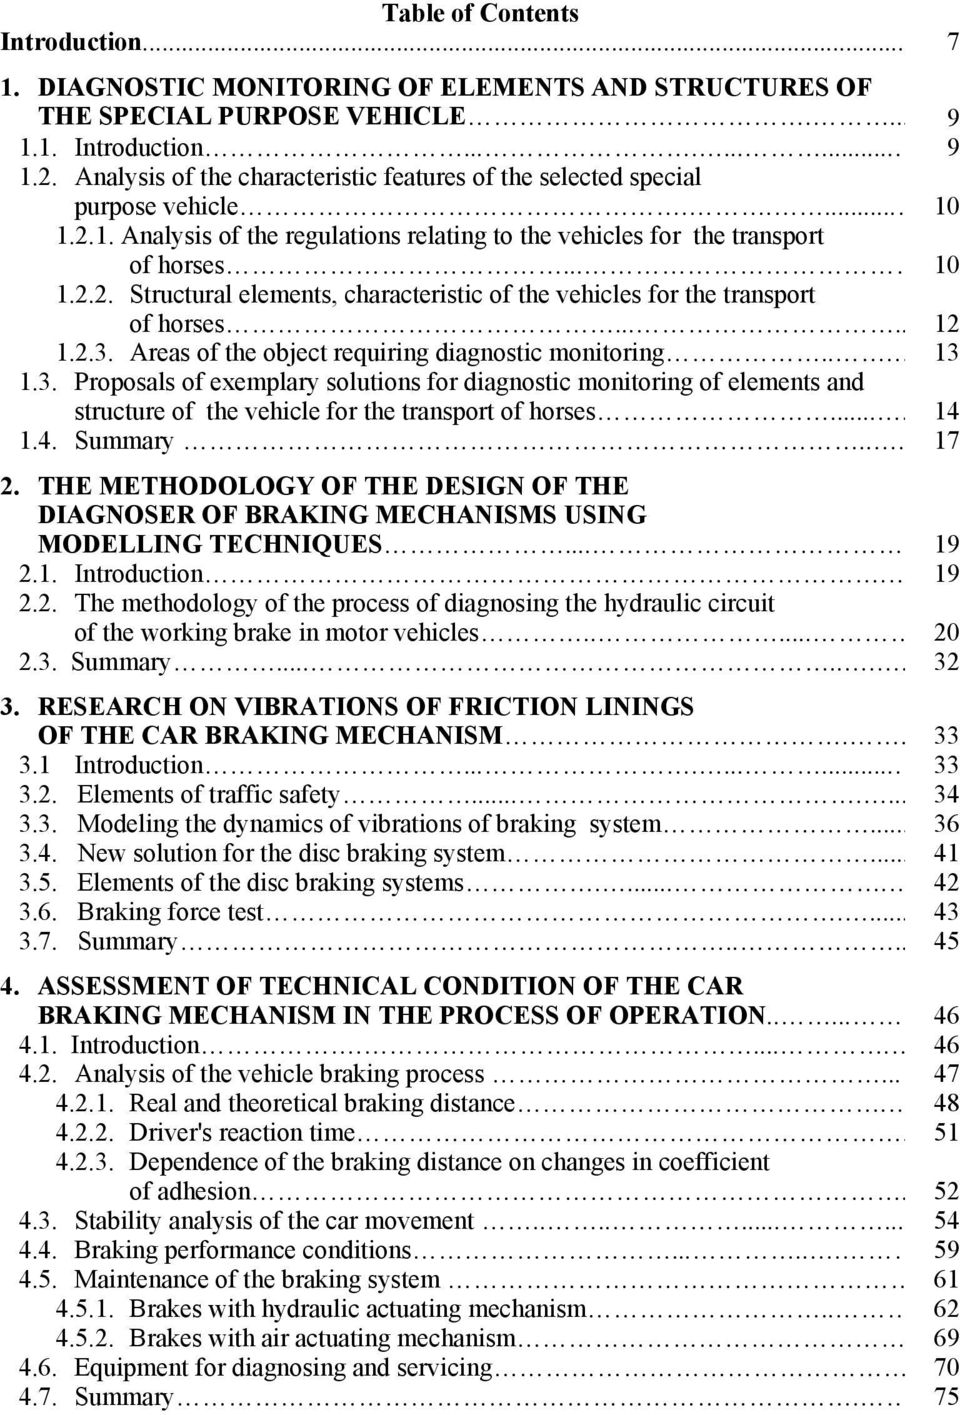 ..... 12 1.2.3. Areas of the object requiring diagnostic monitoring... 13 1.3. Proposals of exemplary solutions for diagnostic monitoring of elements and structure of the vehicle for the transport of horses.